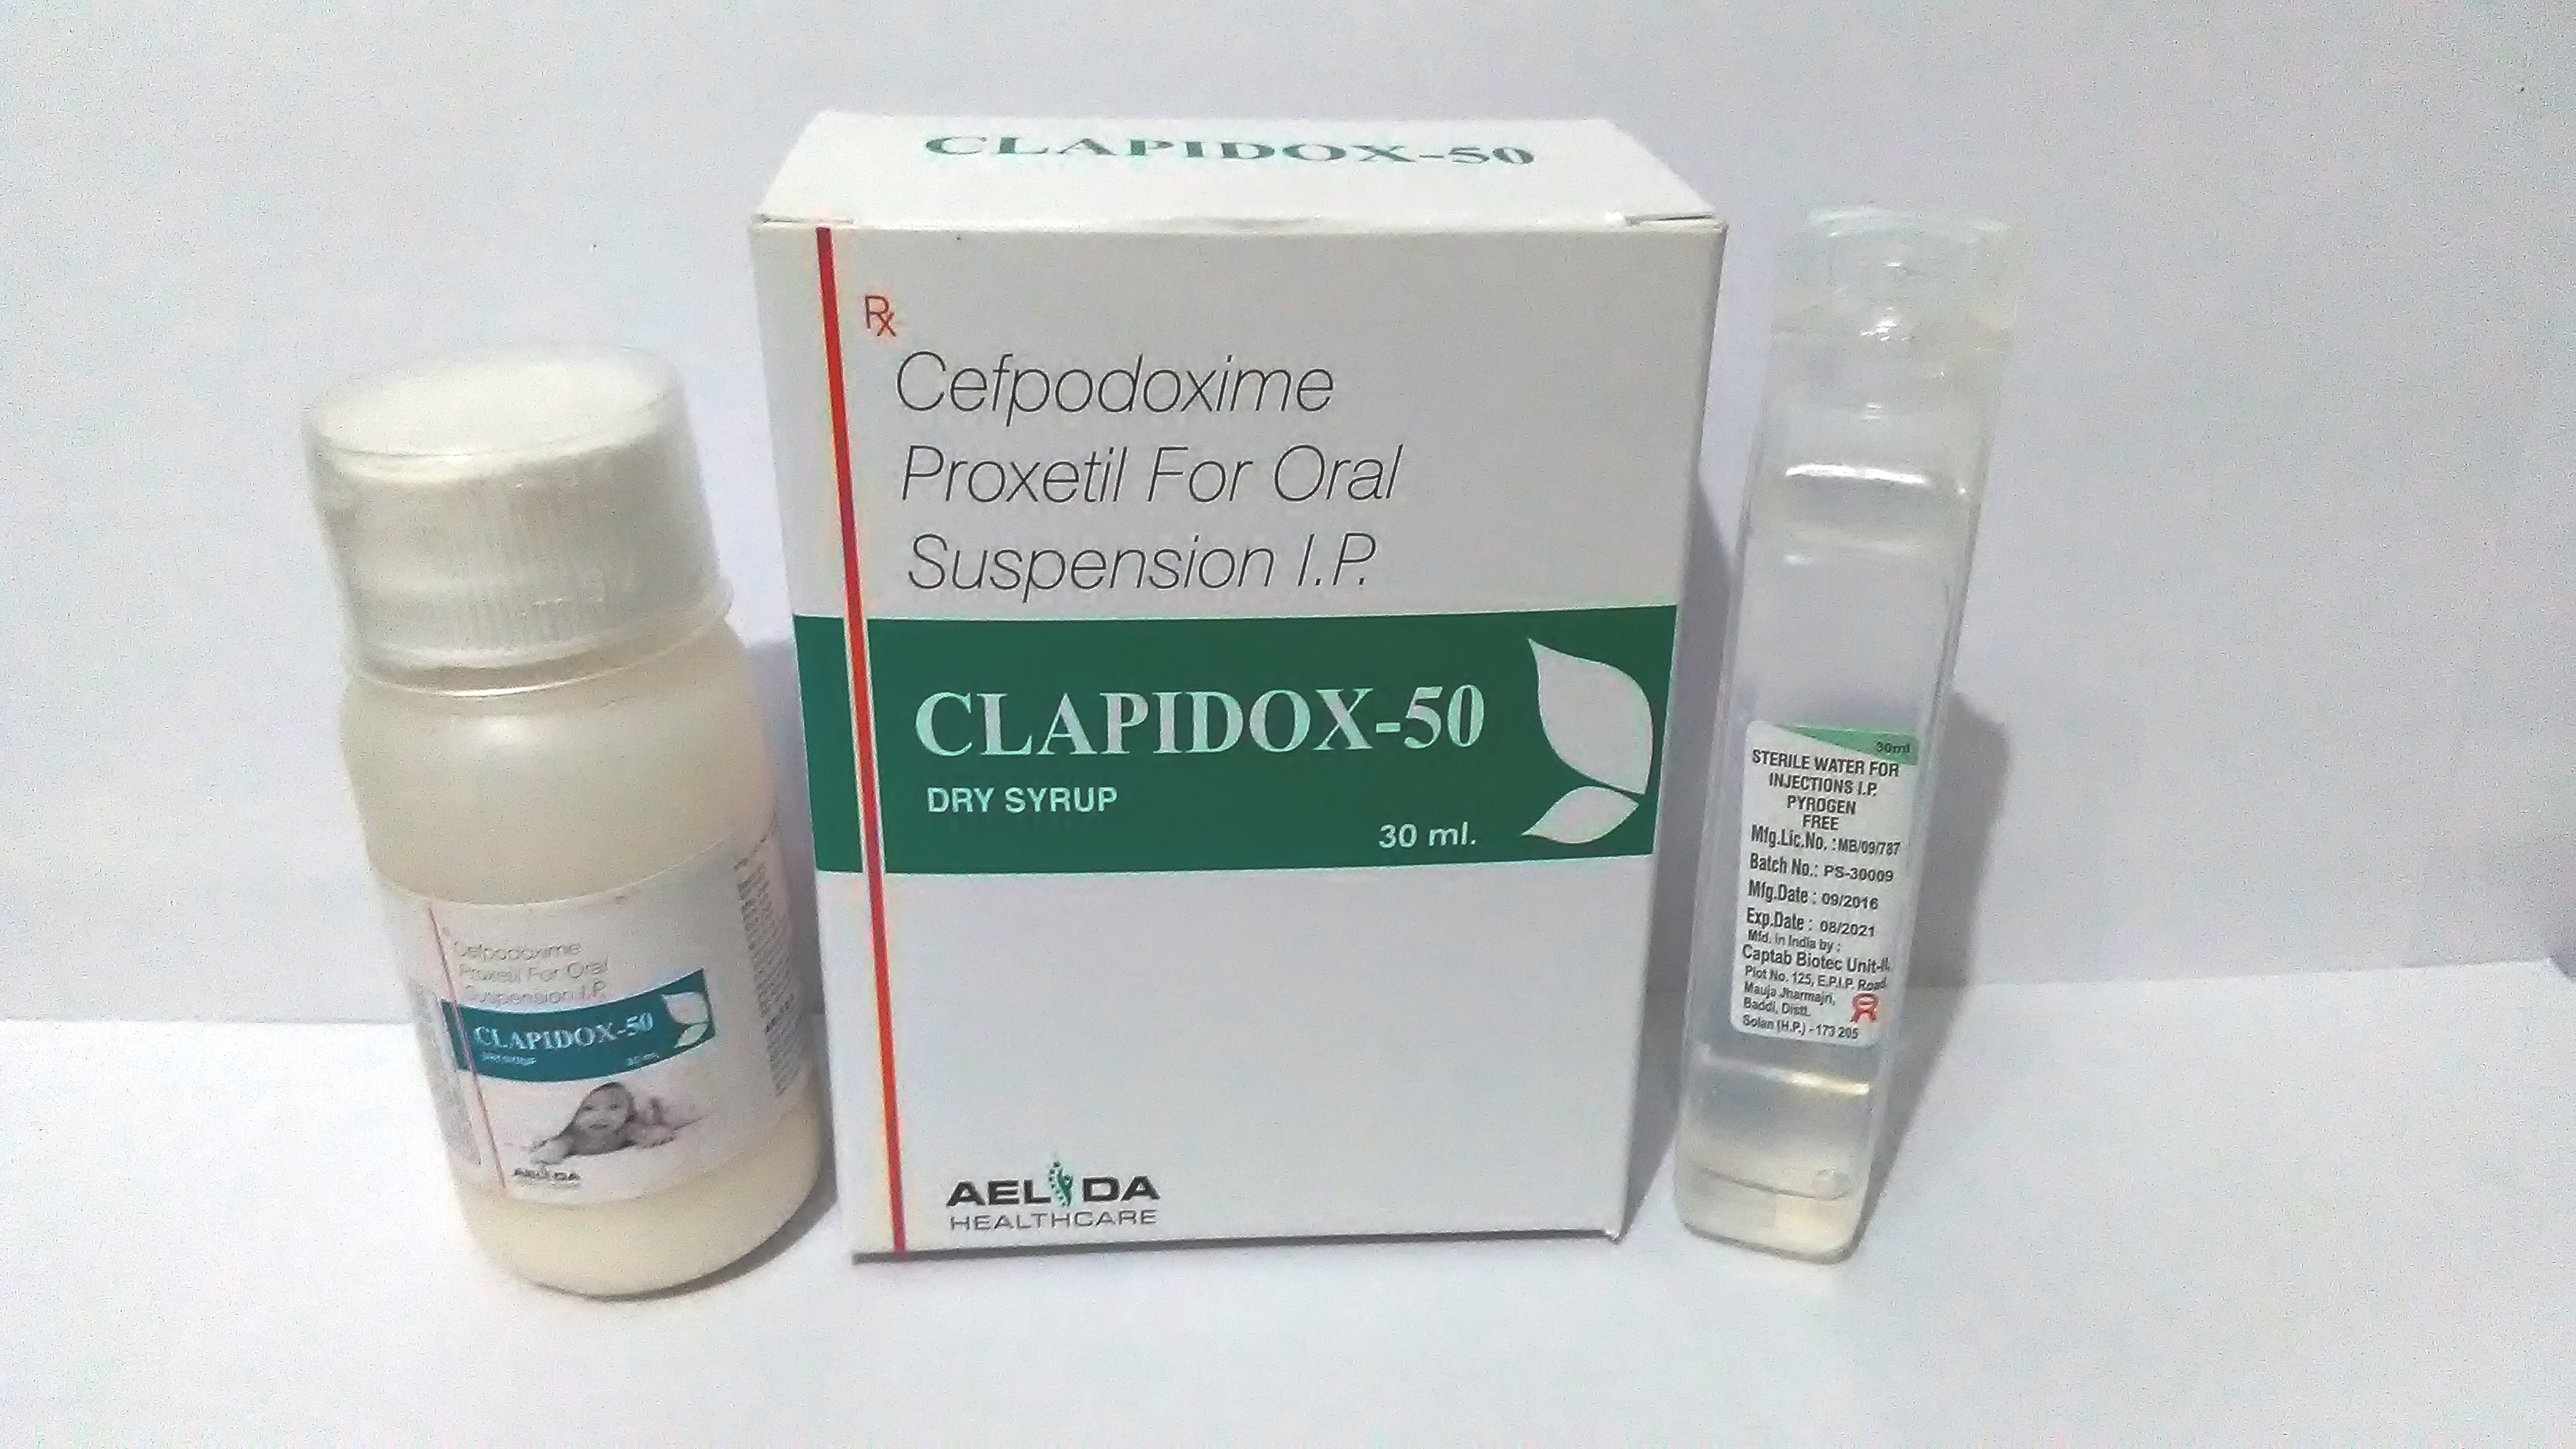 Cefpodoxime 100 Dry Syrup